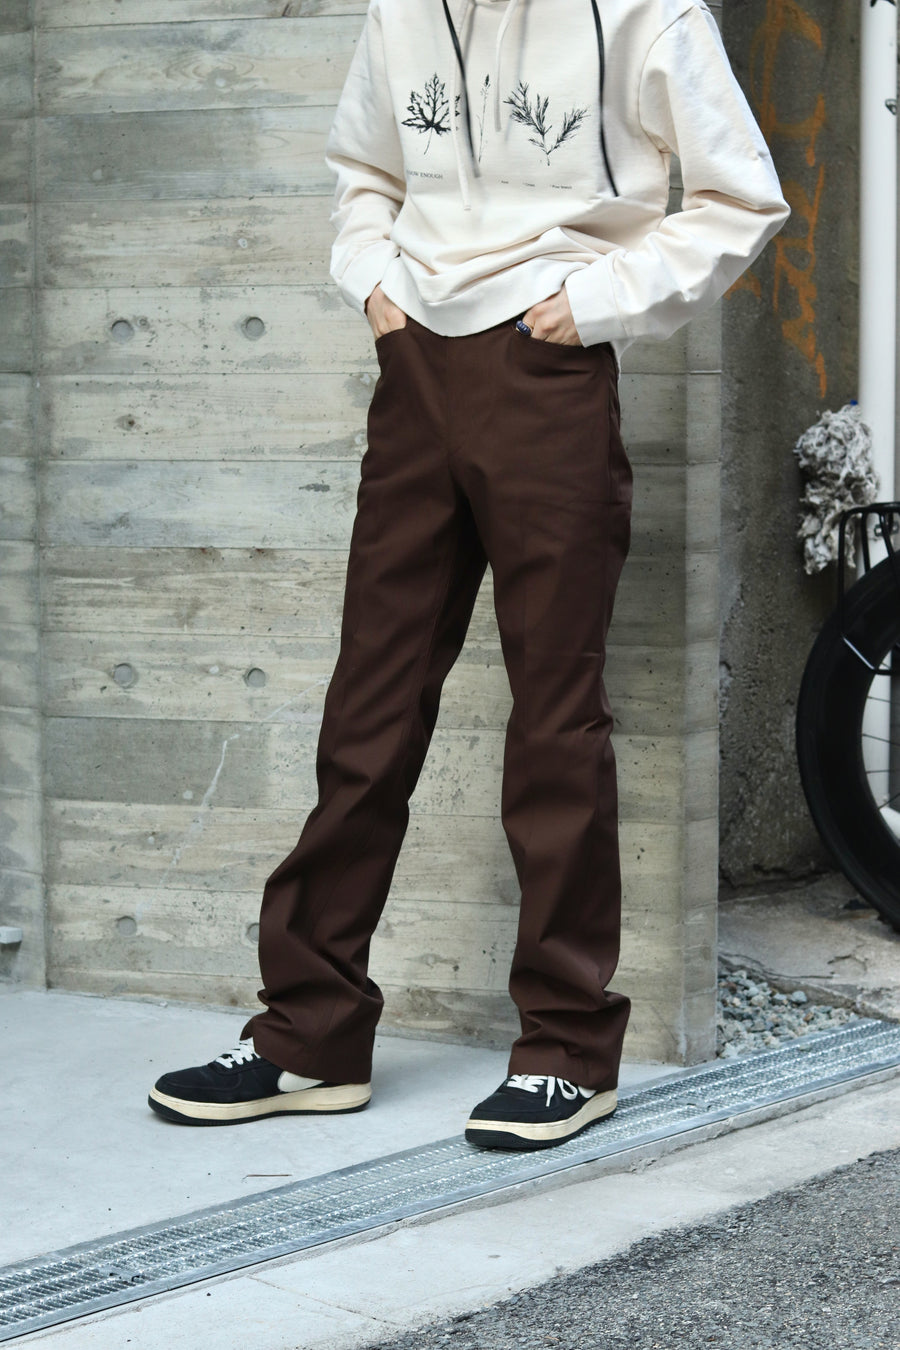 LITTLEBIG  T/C Bootscut Pants (White or Black or Brown)